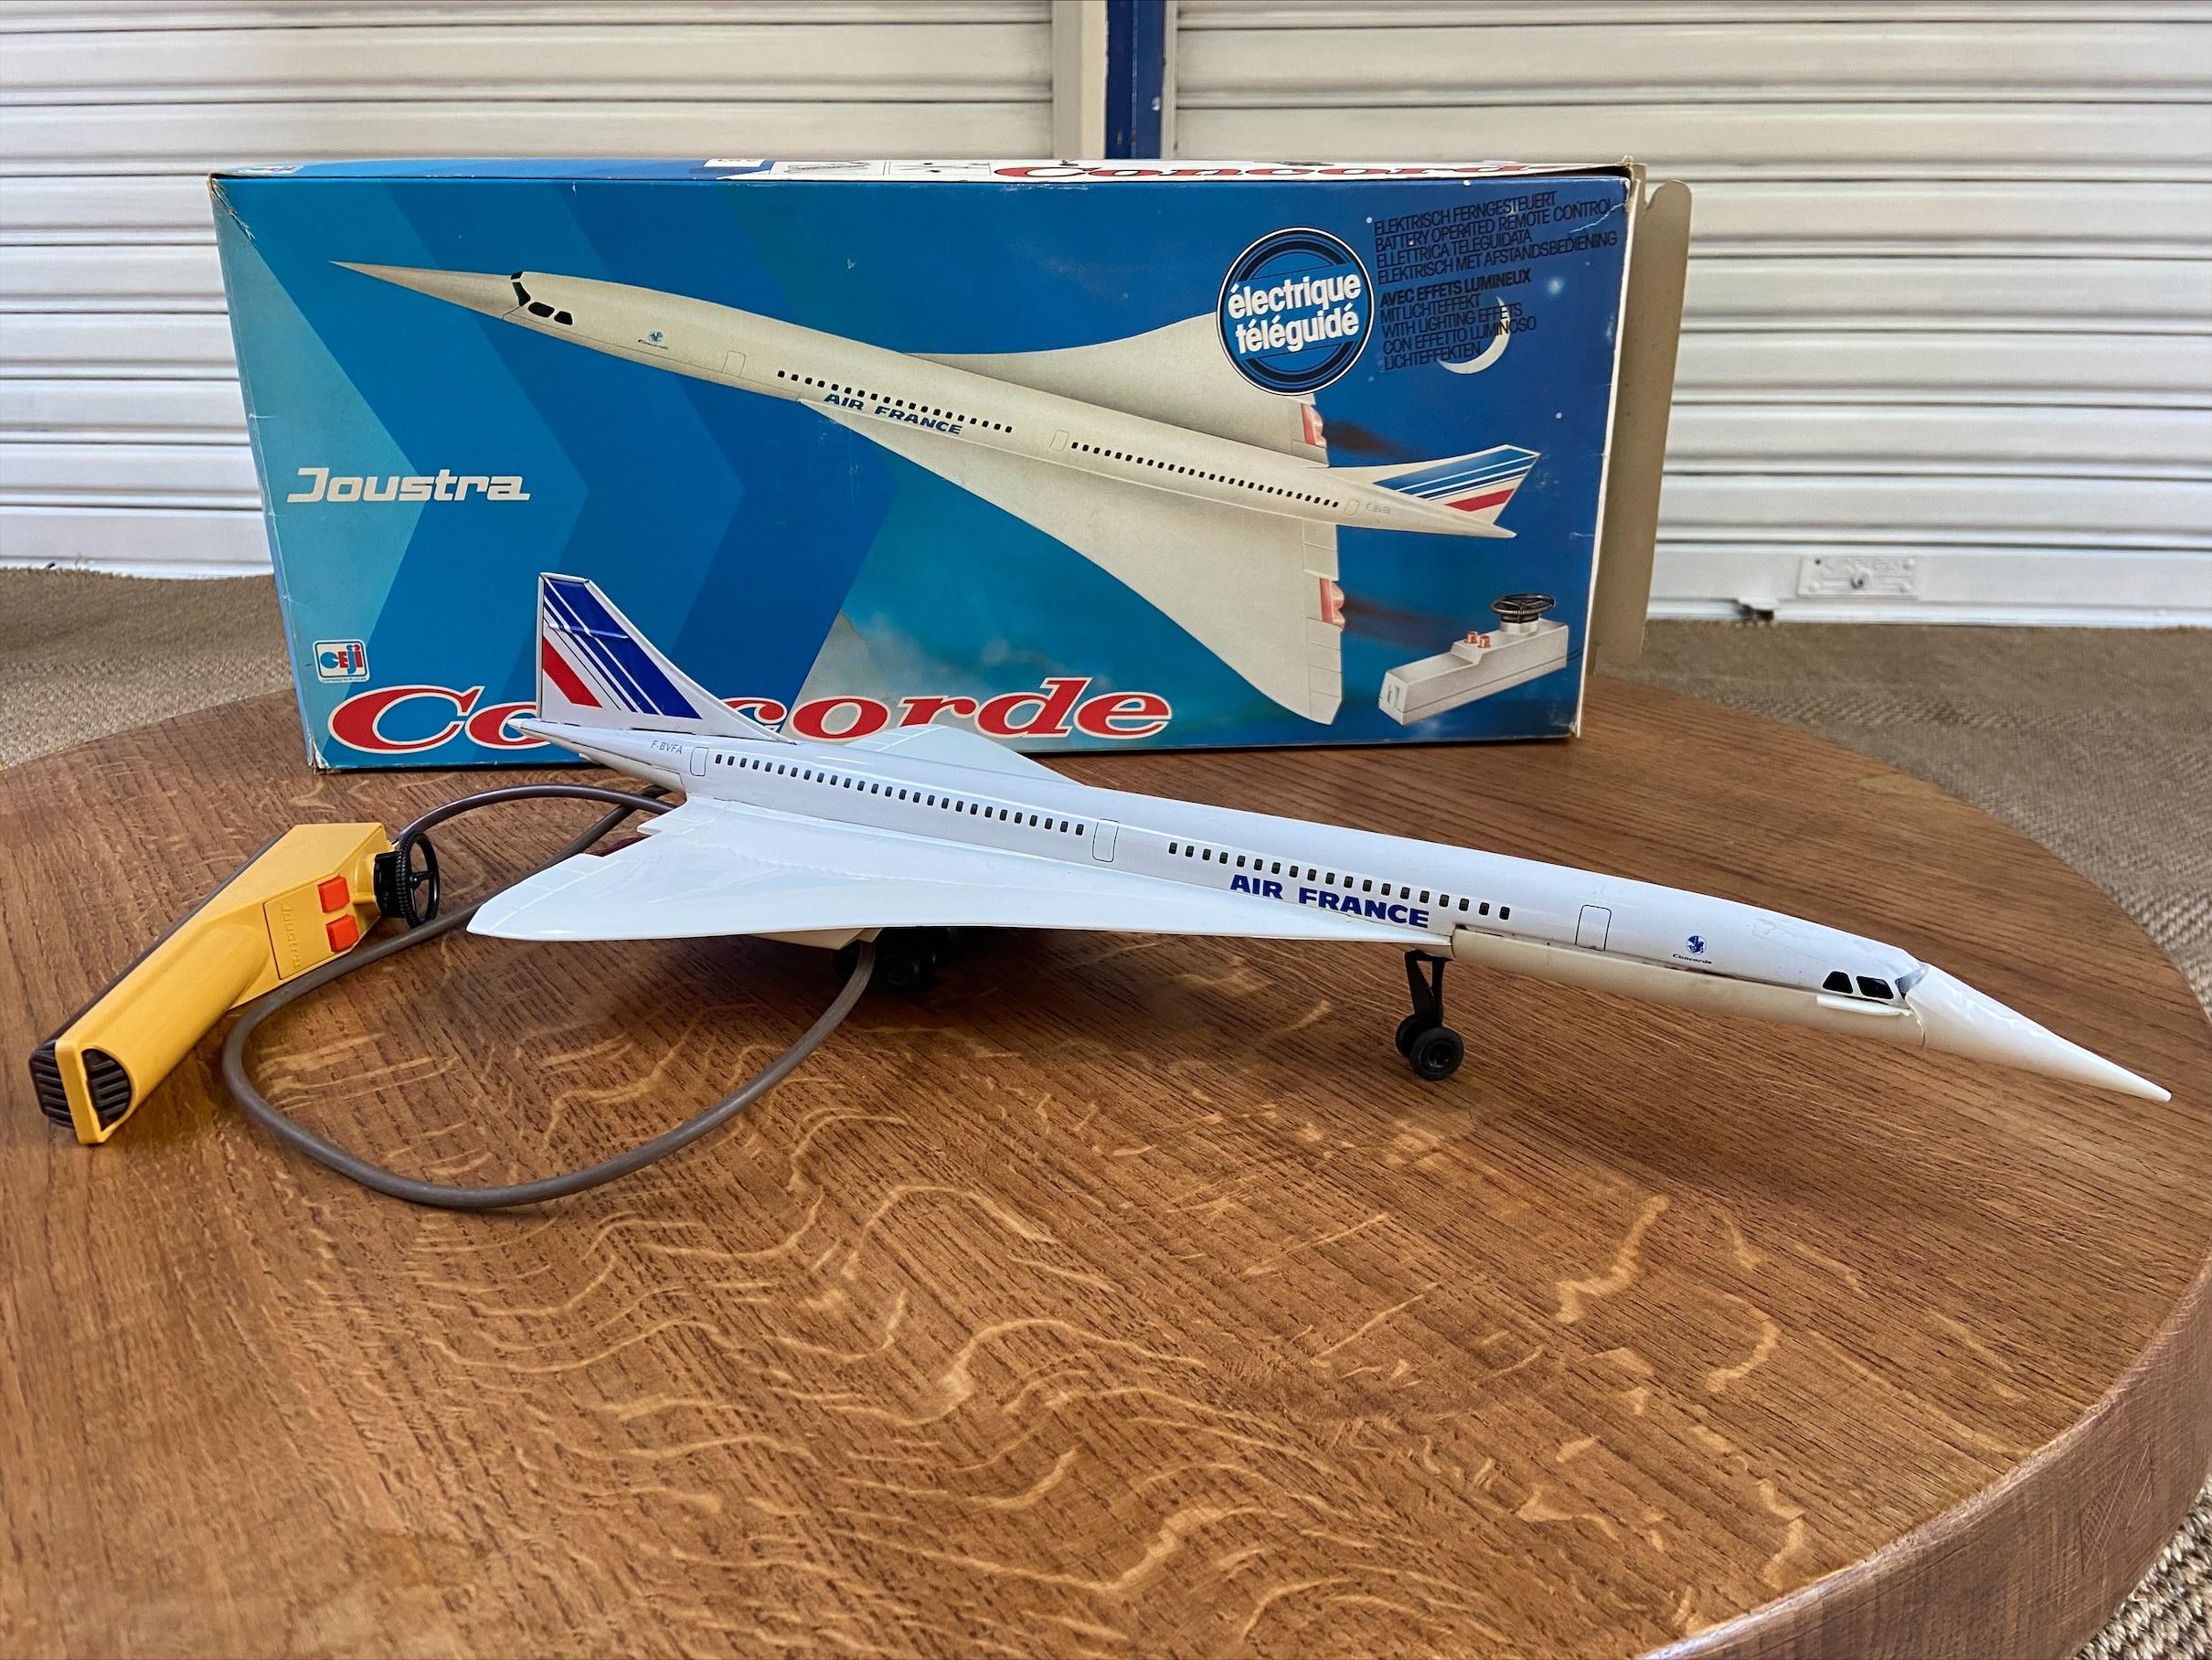 Collectible toy - Concorde 1 plane - 1970s
Electric guided
Joustra Edition
Measures: L 59 x P 27 x H 13 cm
Sheet metal and plastic
Circa 1970
Canned.